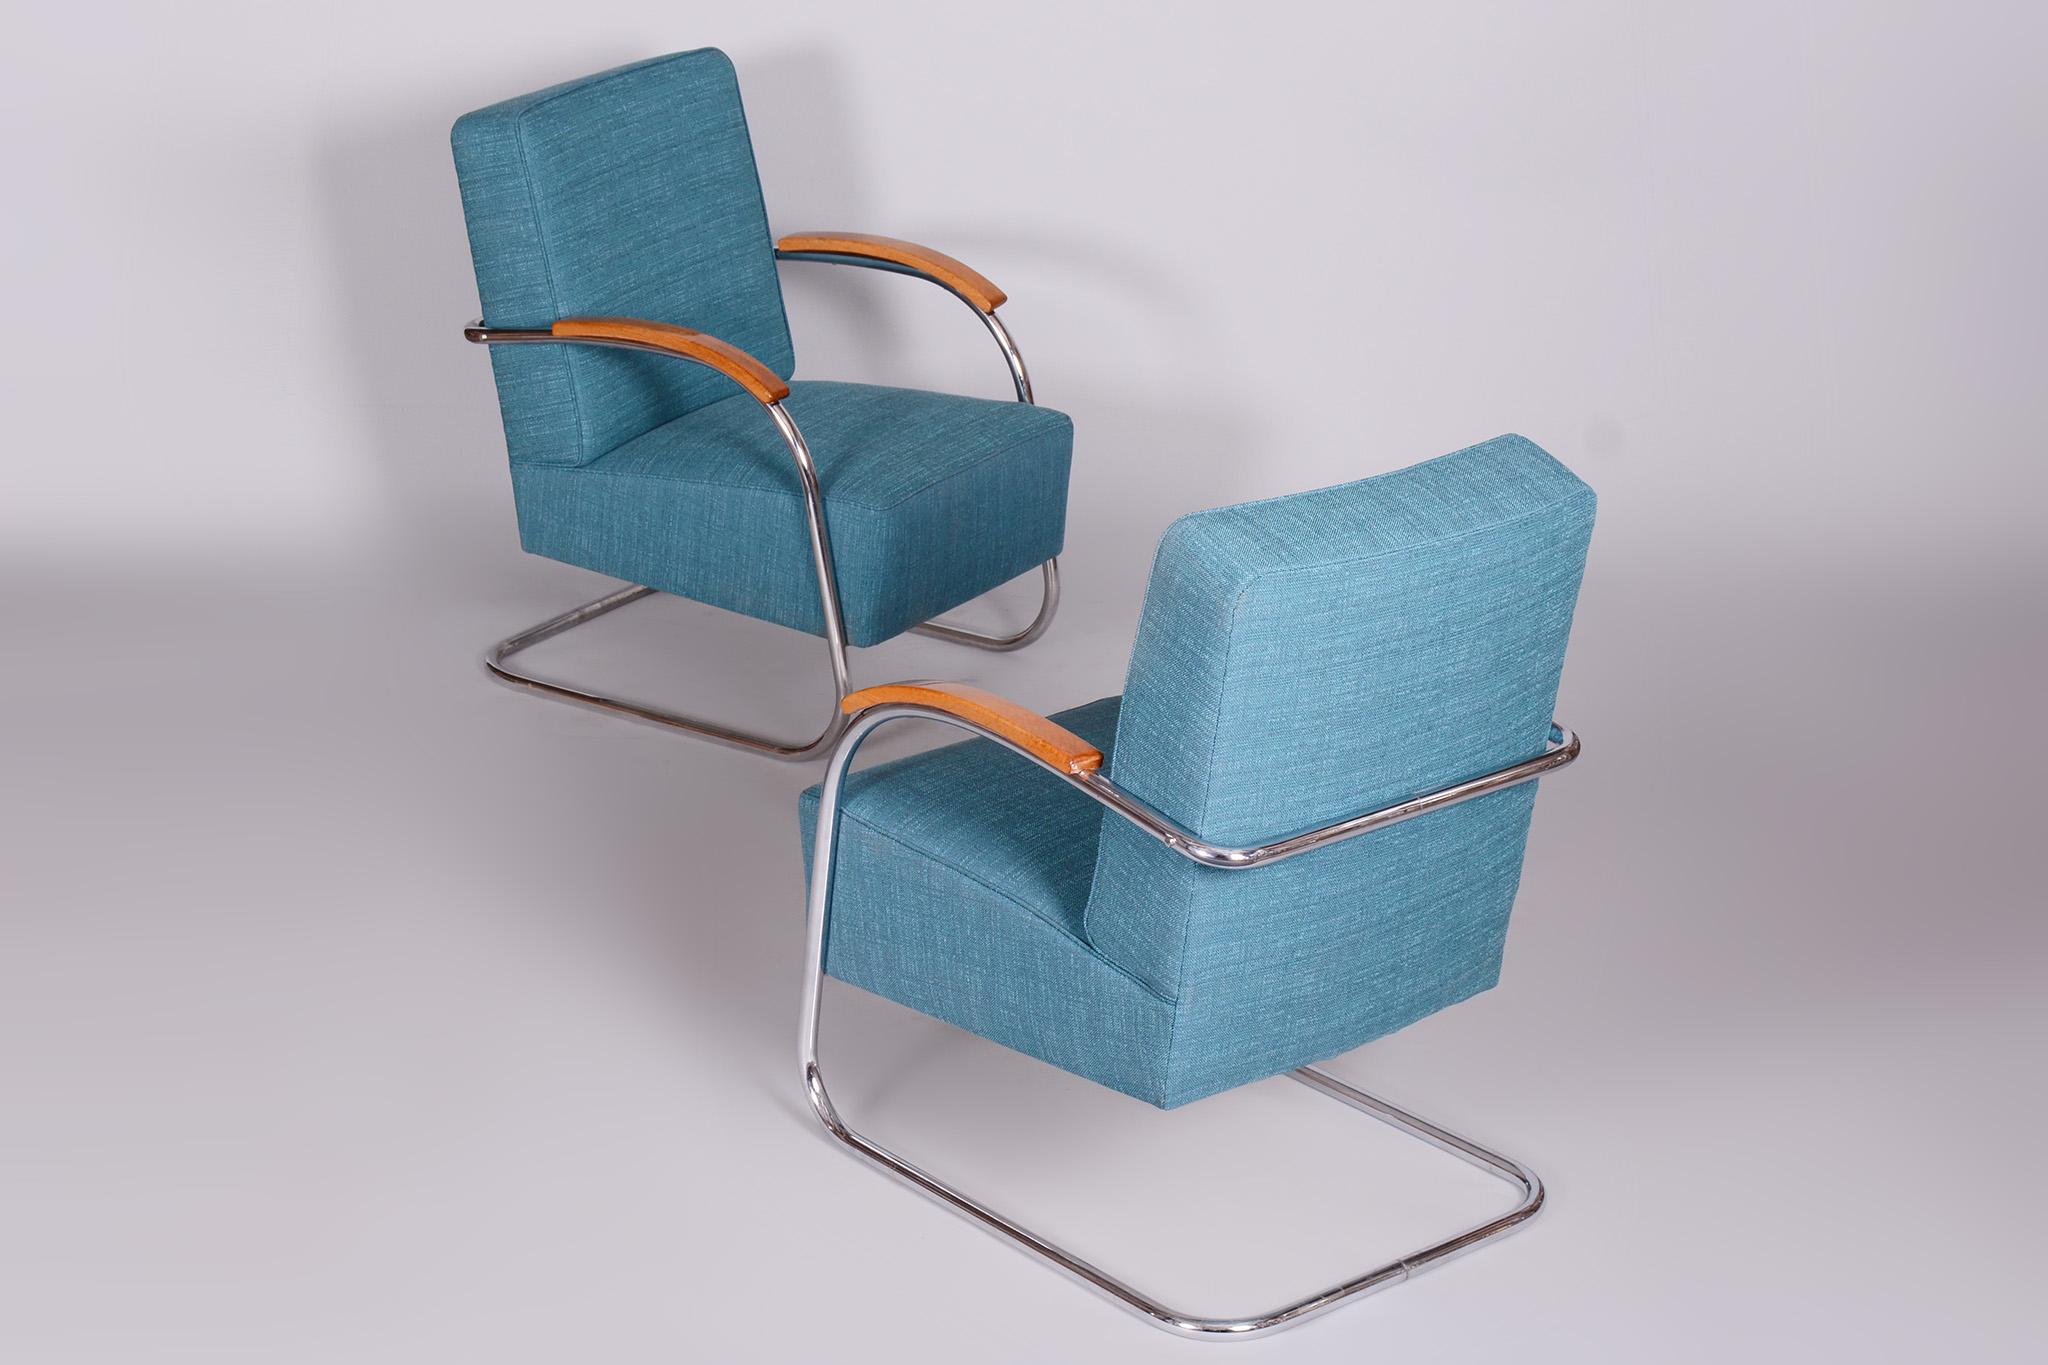 Set of two restored blue armchairs by Mucke-Melder.

Maker: Mucke-Melder
Period: 1930-1939
Source: Czechia
Material: Chrome-plated Steel, High-quality Retro Upholstery Fabric.

Our professional refurbishing team in Czechia has fully restored